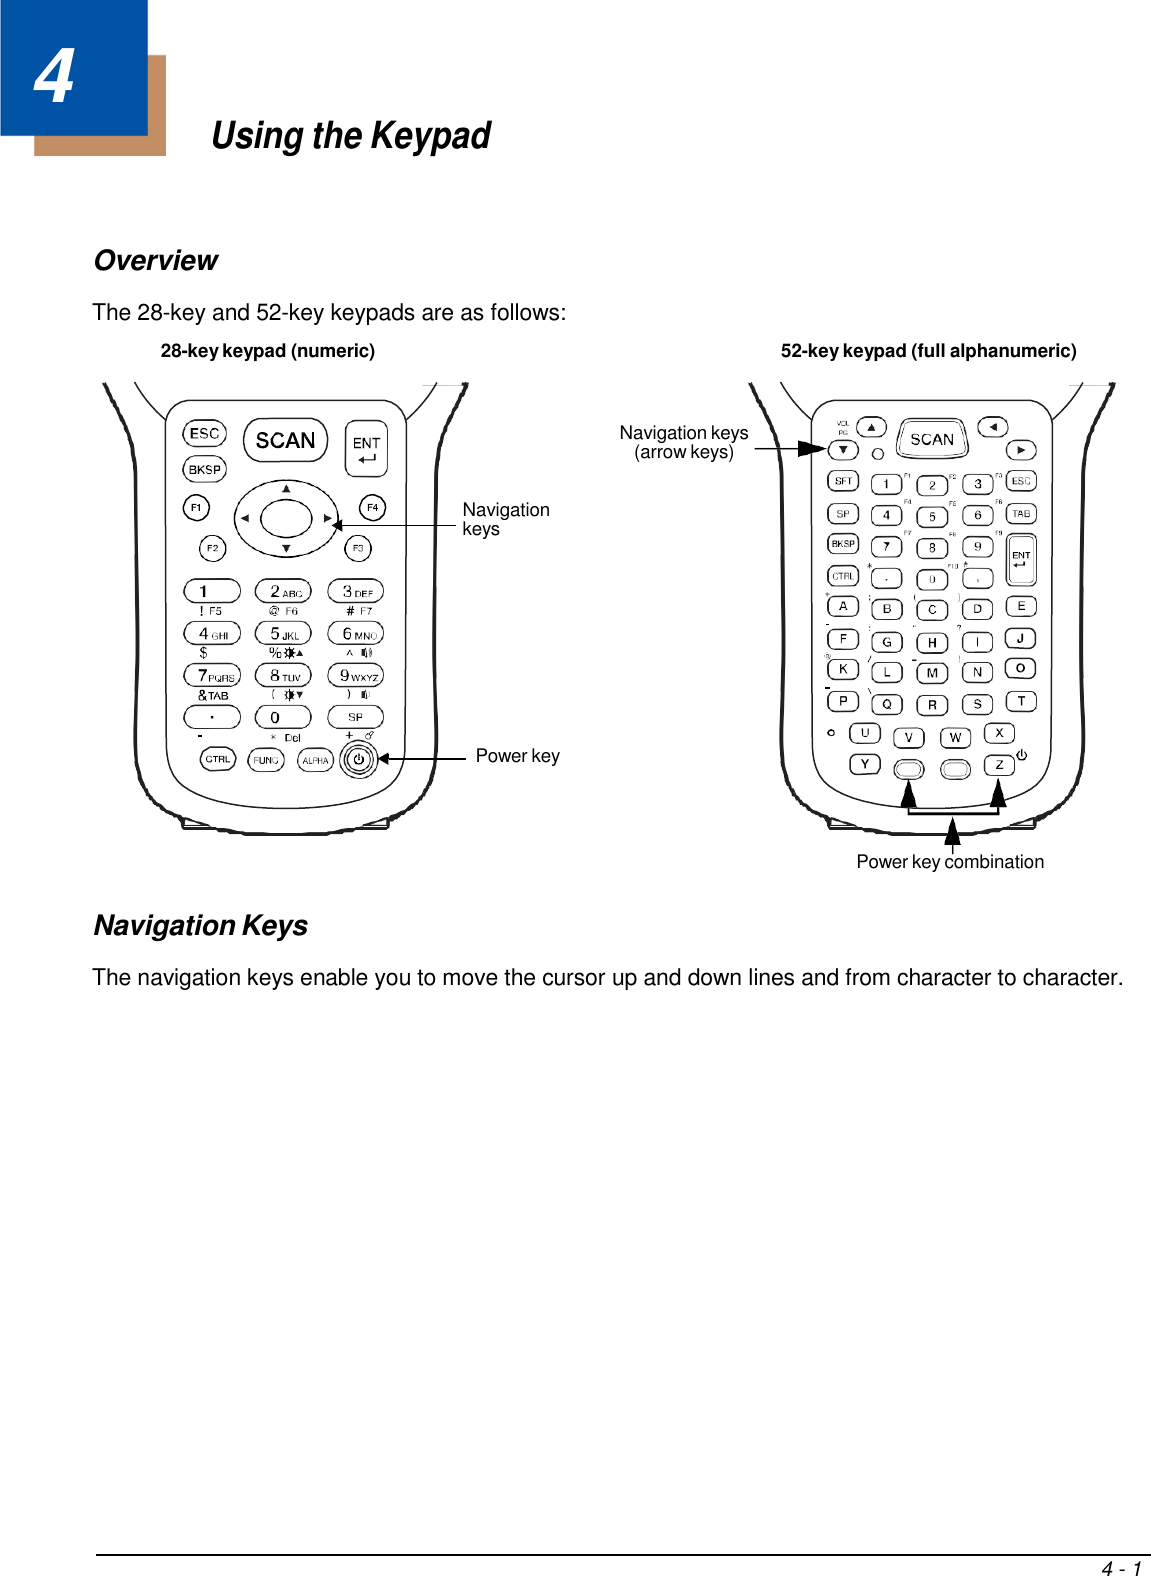        Using the Keypad   Overview The 28-key and 52-key keypads are as follows: 28-key keypad (numeric)  52-key keypad (full alphanumeric)   Navigation keys (arrow keys)  Navigation keys         Power key    Power key combination  Navigation Keys The navigation keys enable you to move the cursor up and down lines and from character to character.                          4 - 1 4 